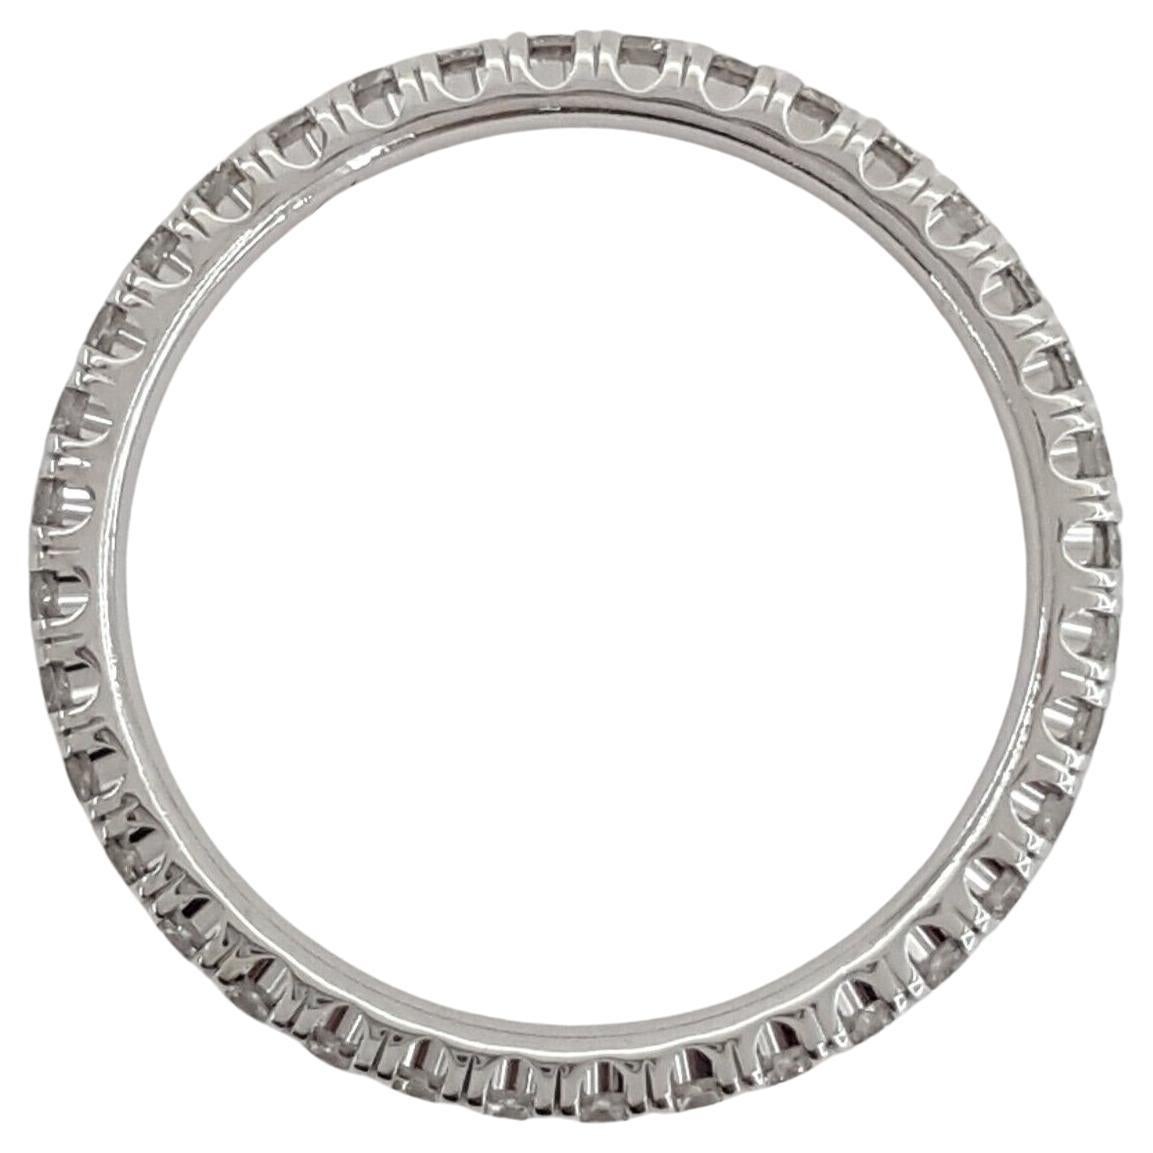 An Eternity Band Ring from Cartier, named ÉTINCELLE DE Cartier, showcases a French Pave Set with 0.45 ct Round Diamonds in a full circle design, set in 18K White Gold. Weighing 1.7 grams and sized 4.75 (French 49), the ring has dimensions of 2 mm in